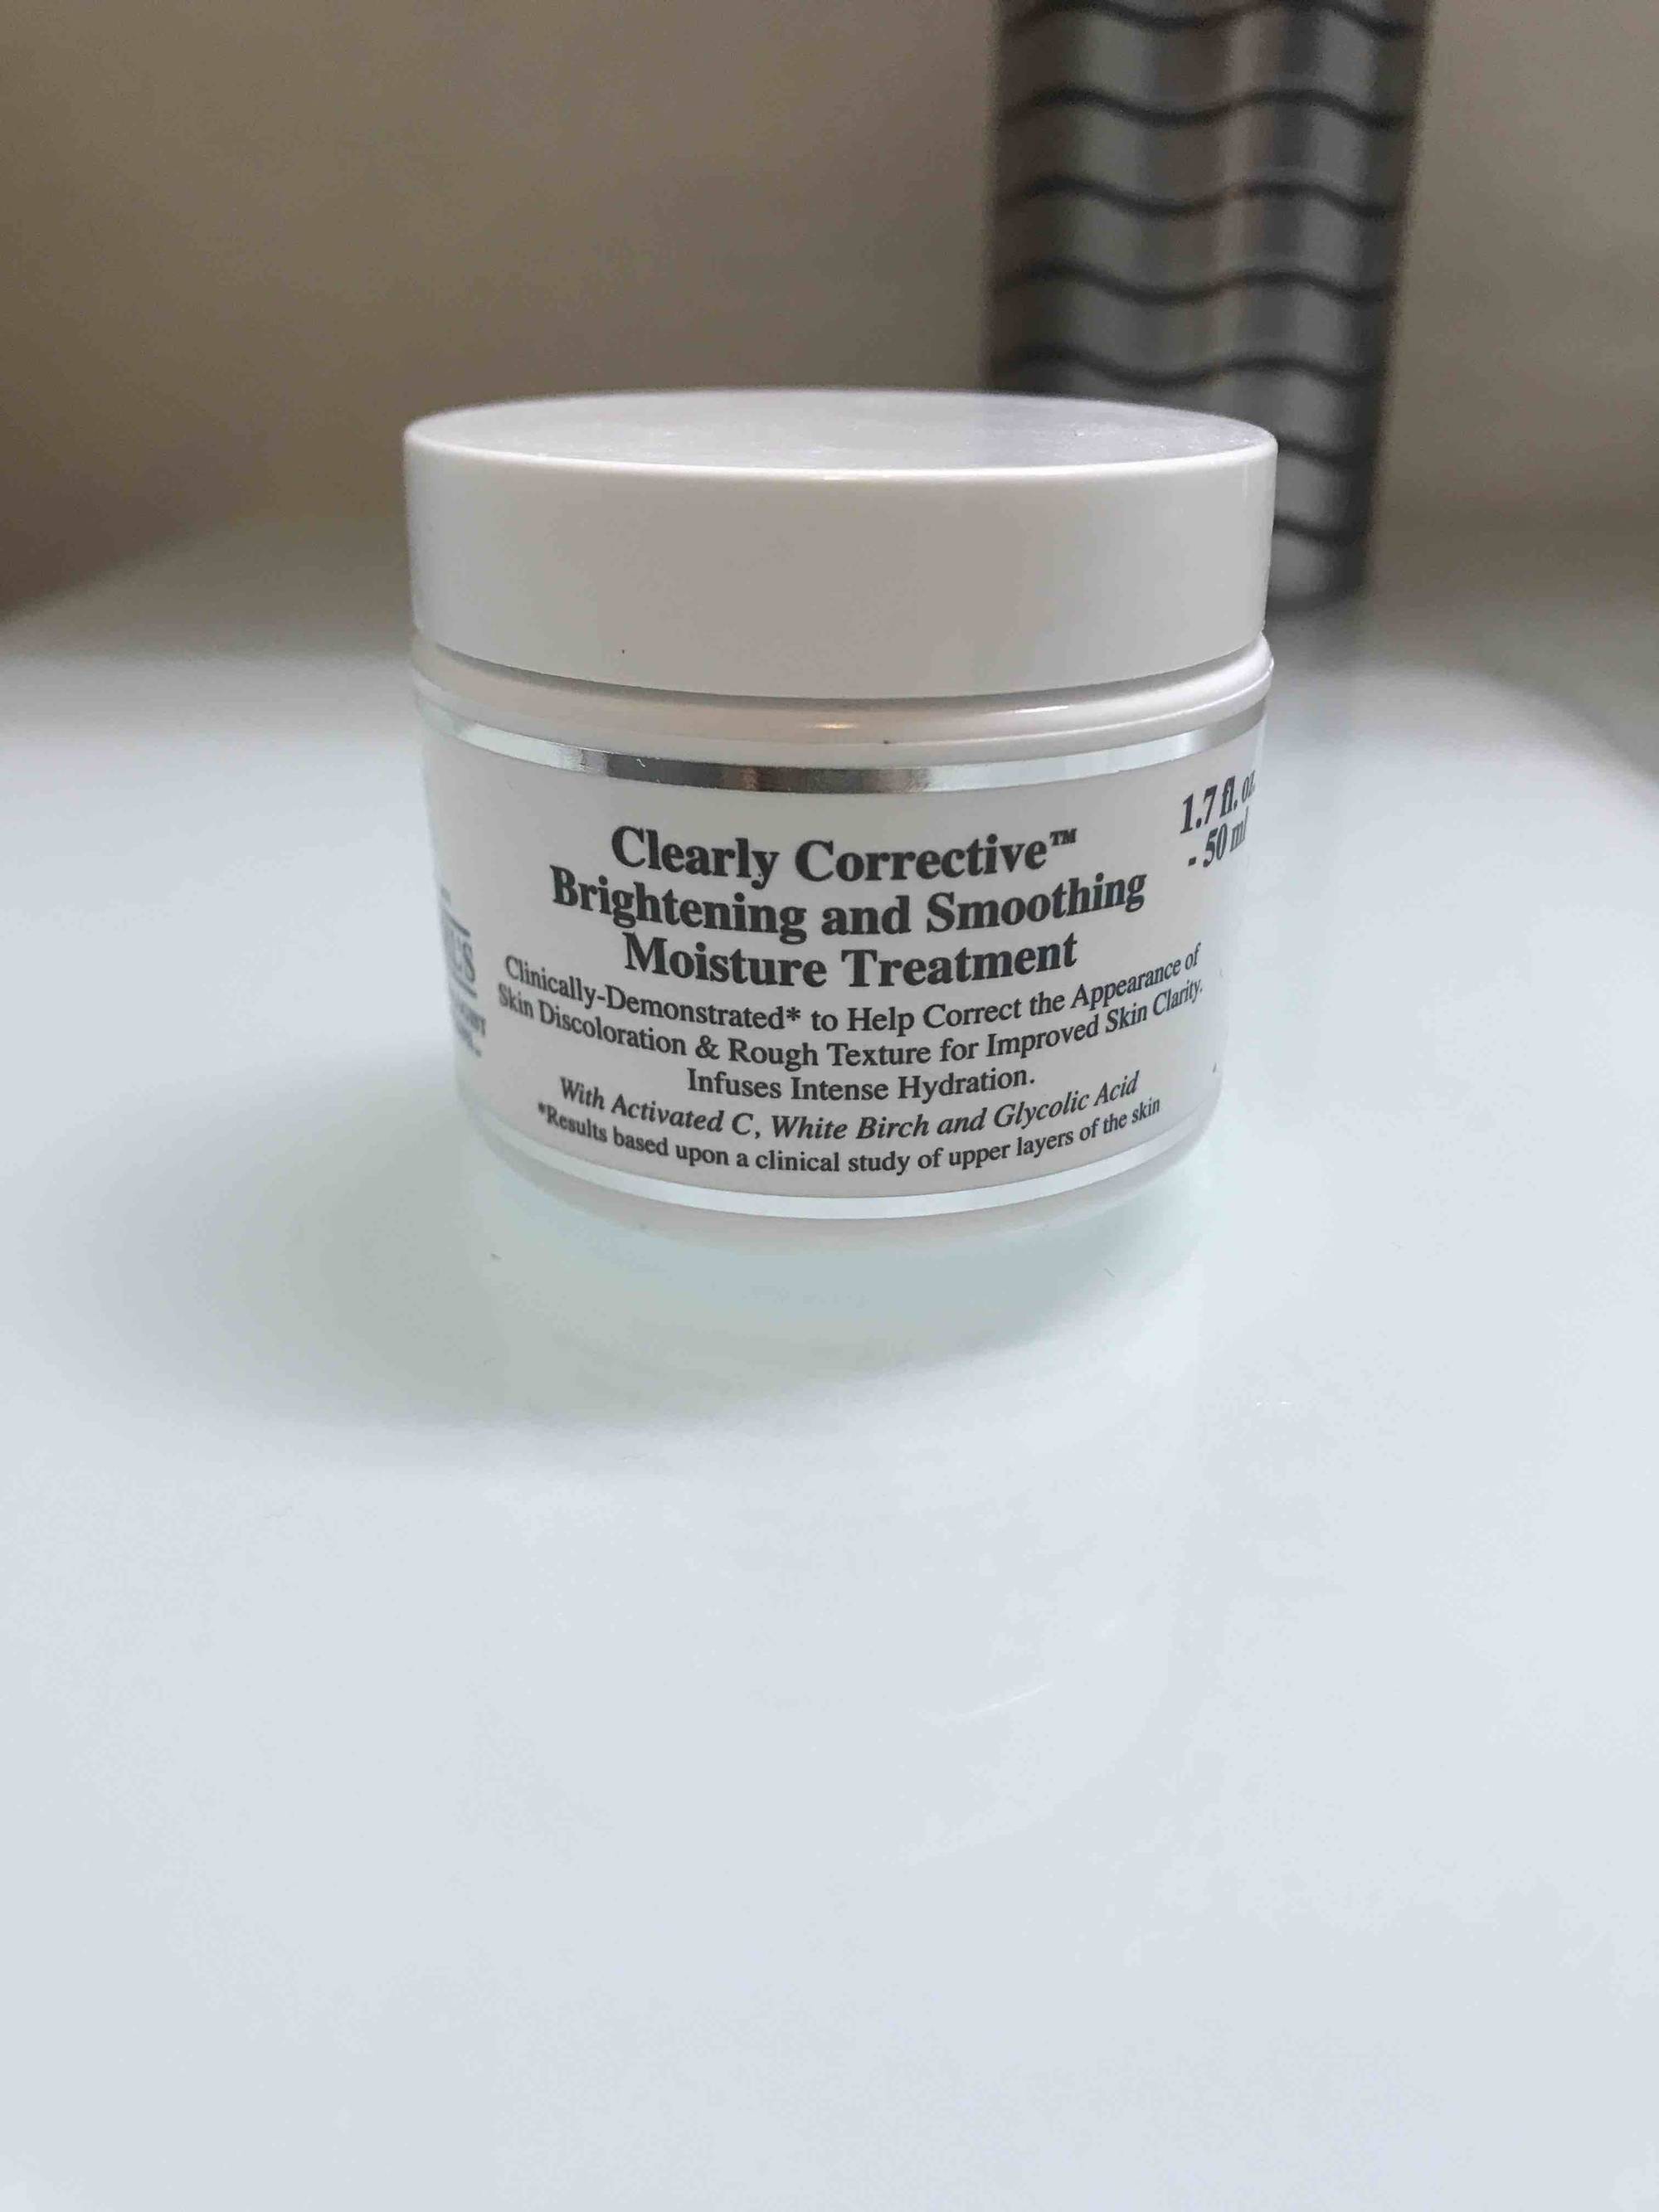 KIEHL'S - Clearly corrective - Brightening and smoothing moisture treatment